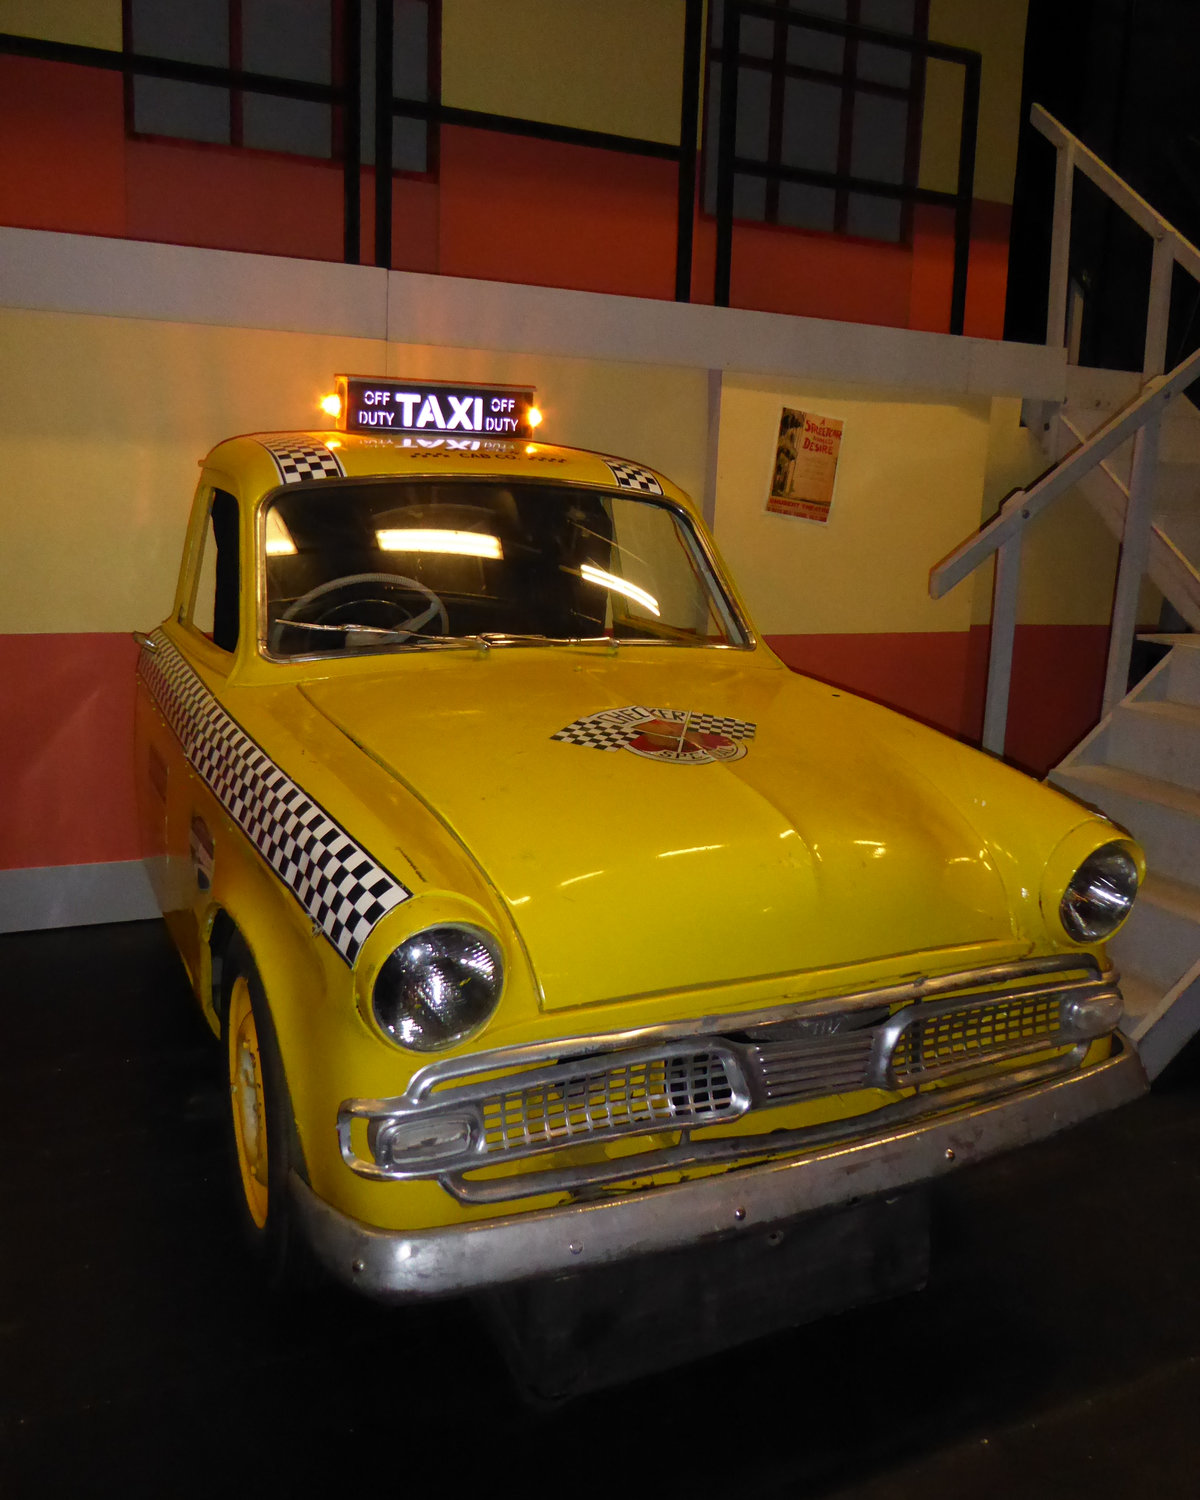 Fame Taxi